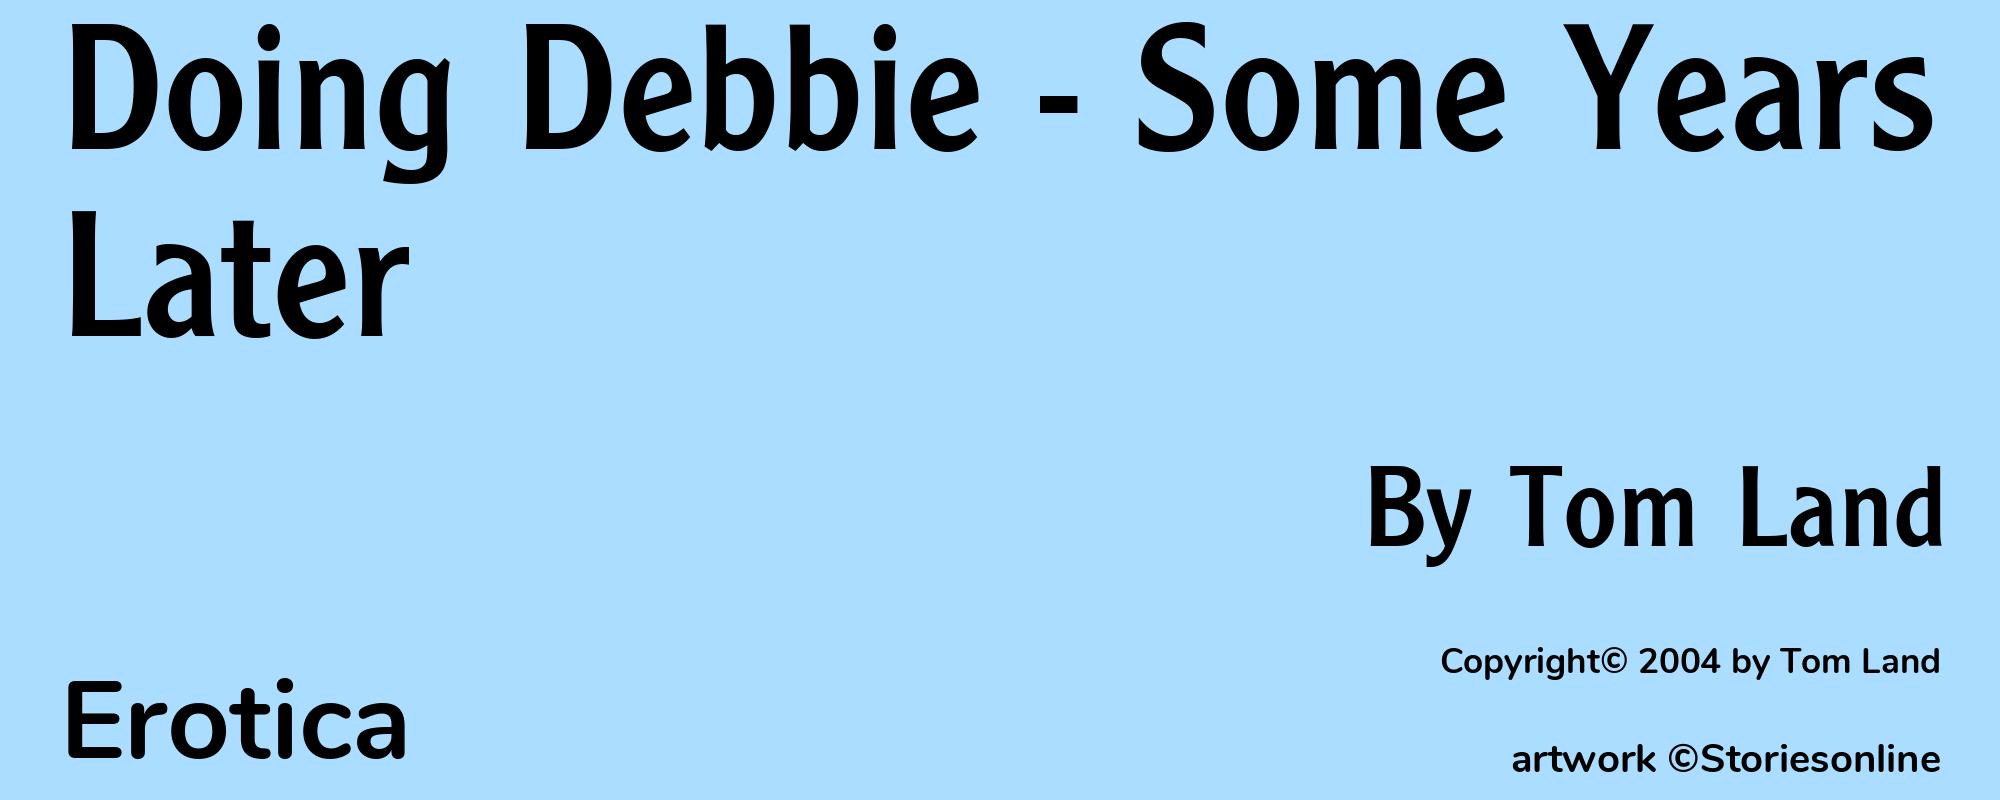 Doing Debbie - Some Years Later - Cover